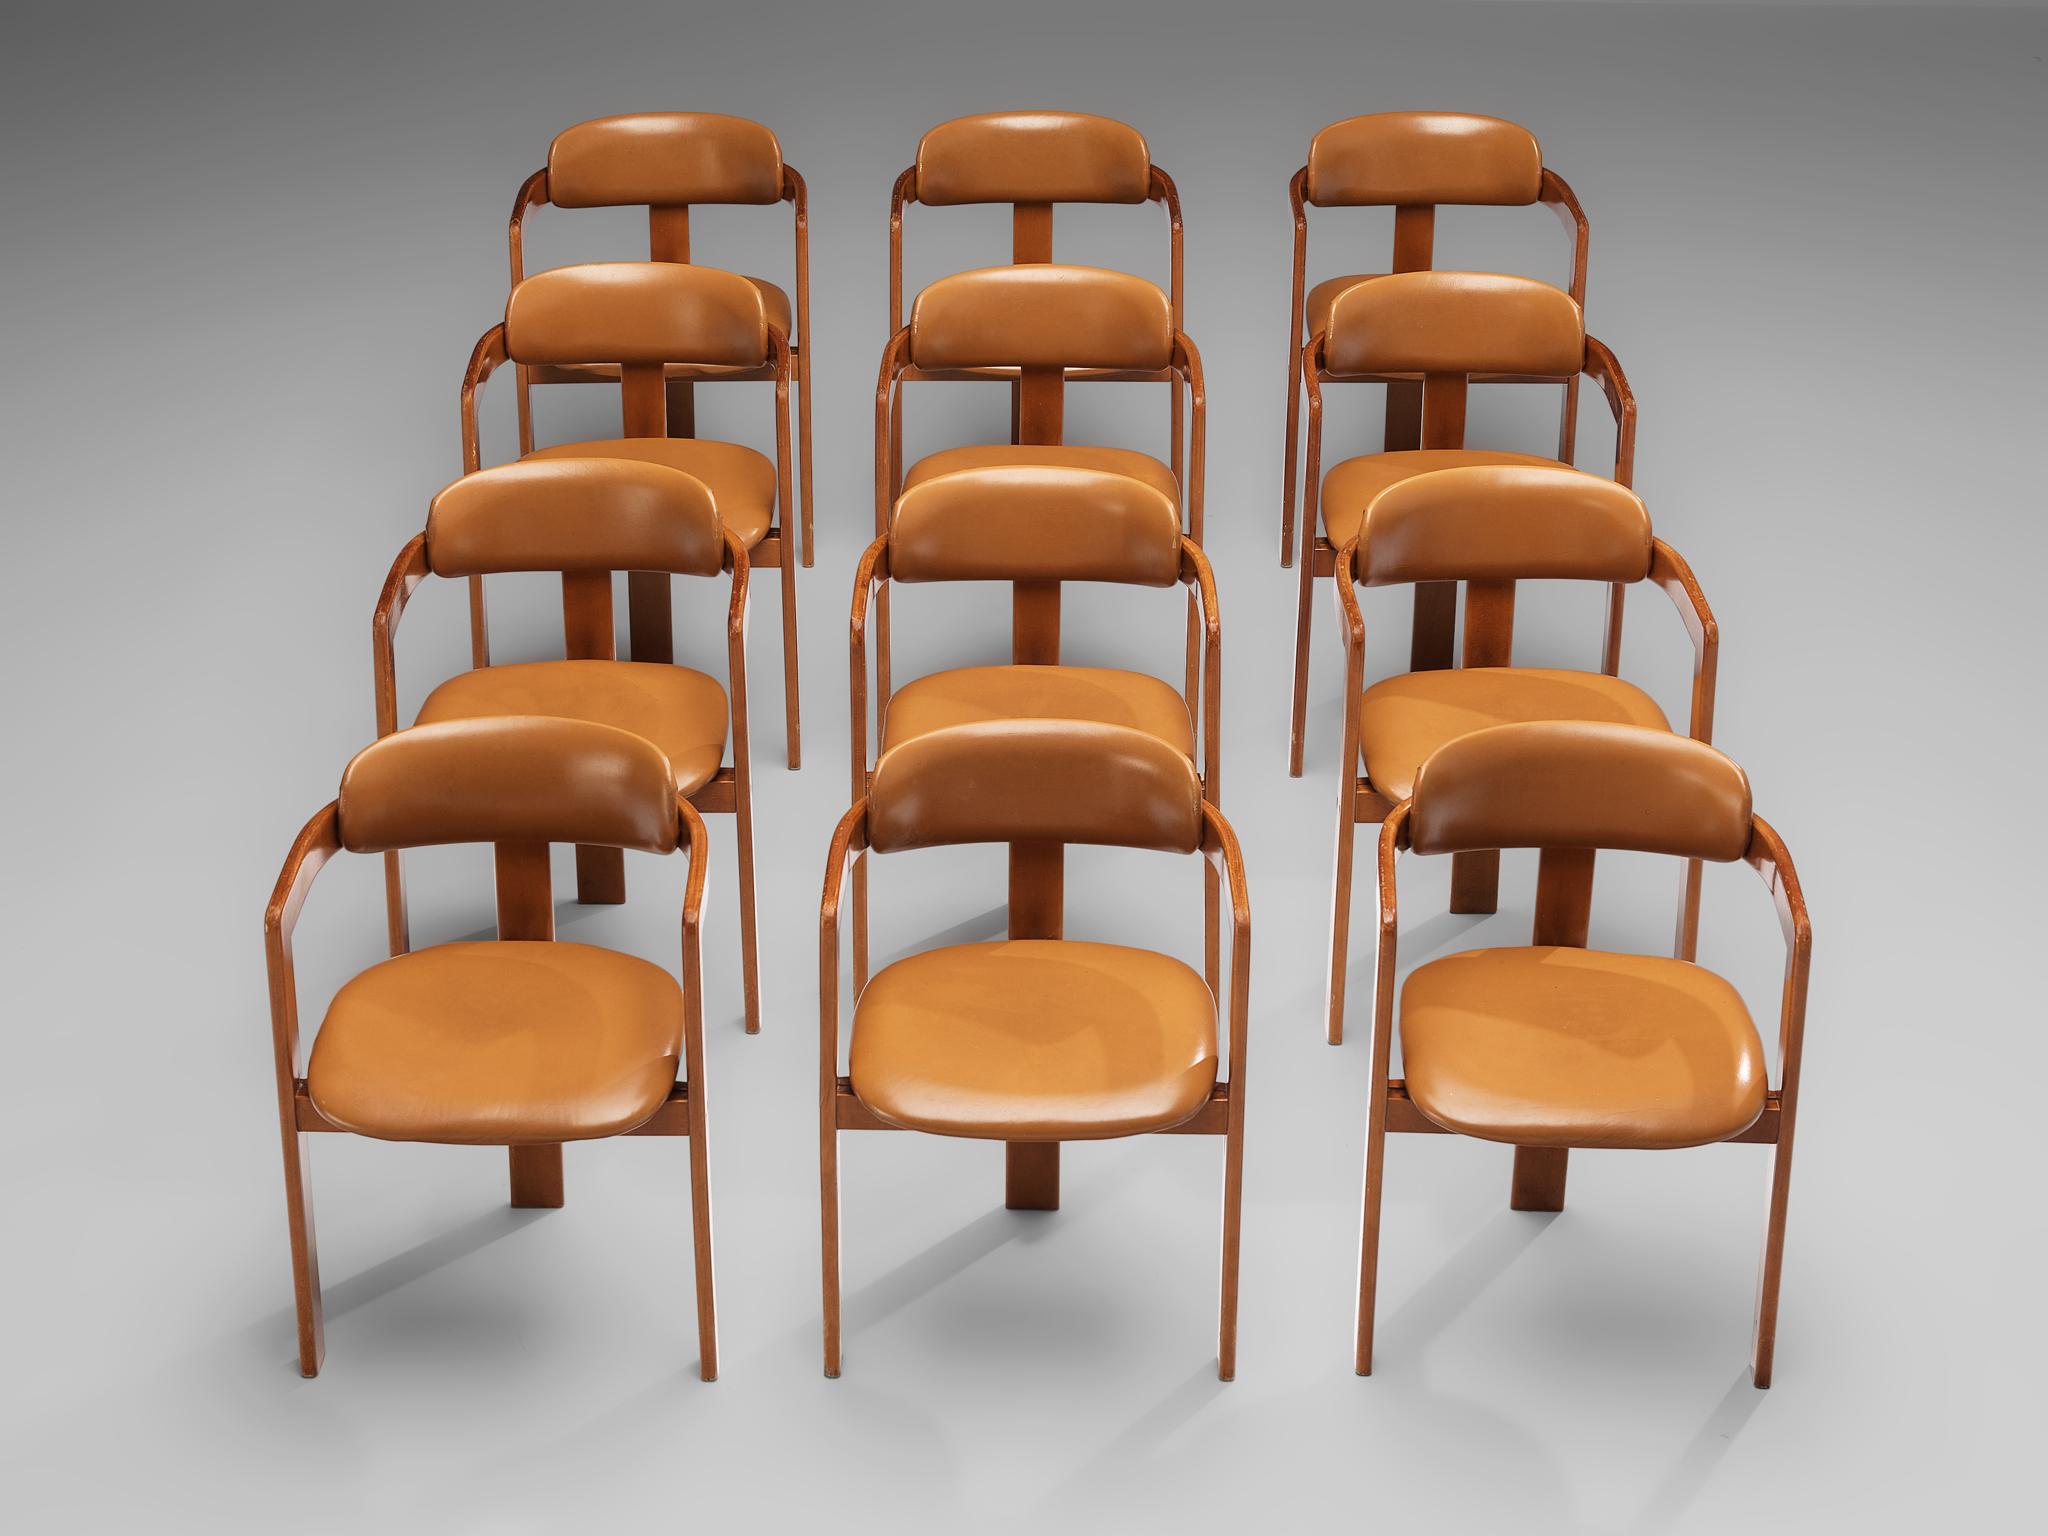 Set of 14 dining chairs, wood, leatherette, Italy, 1970s

This set of Italian dining chairs has a strong resemblance to Augusto Savinis 'Pamplona' chair (1965) and Afra & Tobia Scrapas 'Pigreco' chair (1959/60) yet the designs are different in their